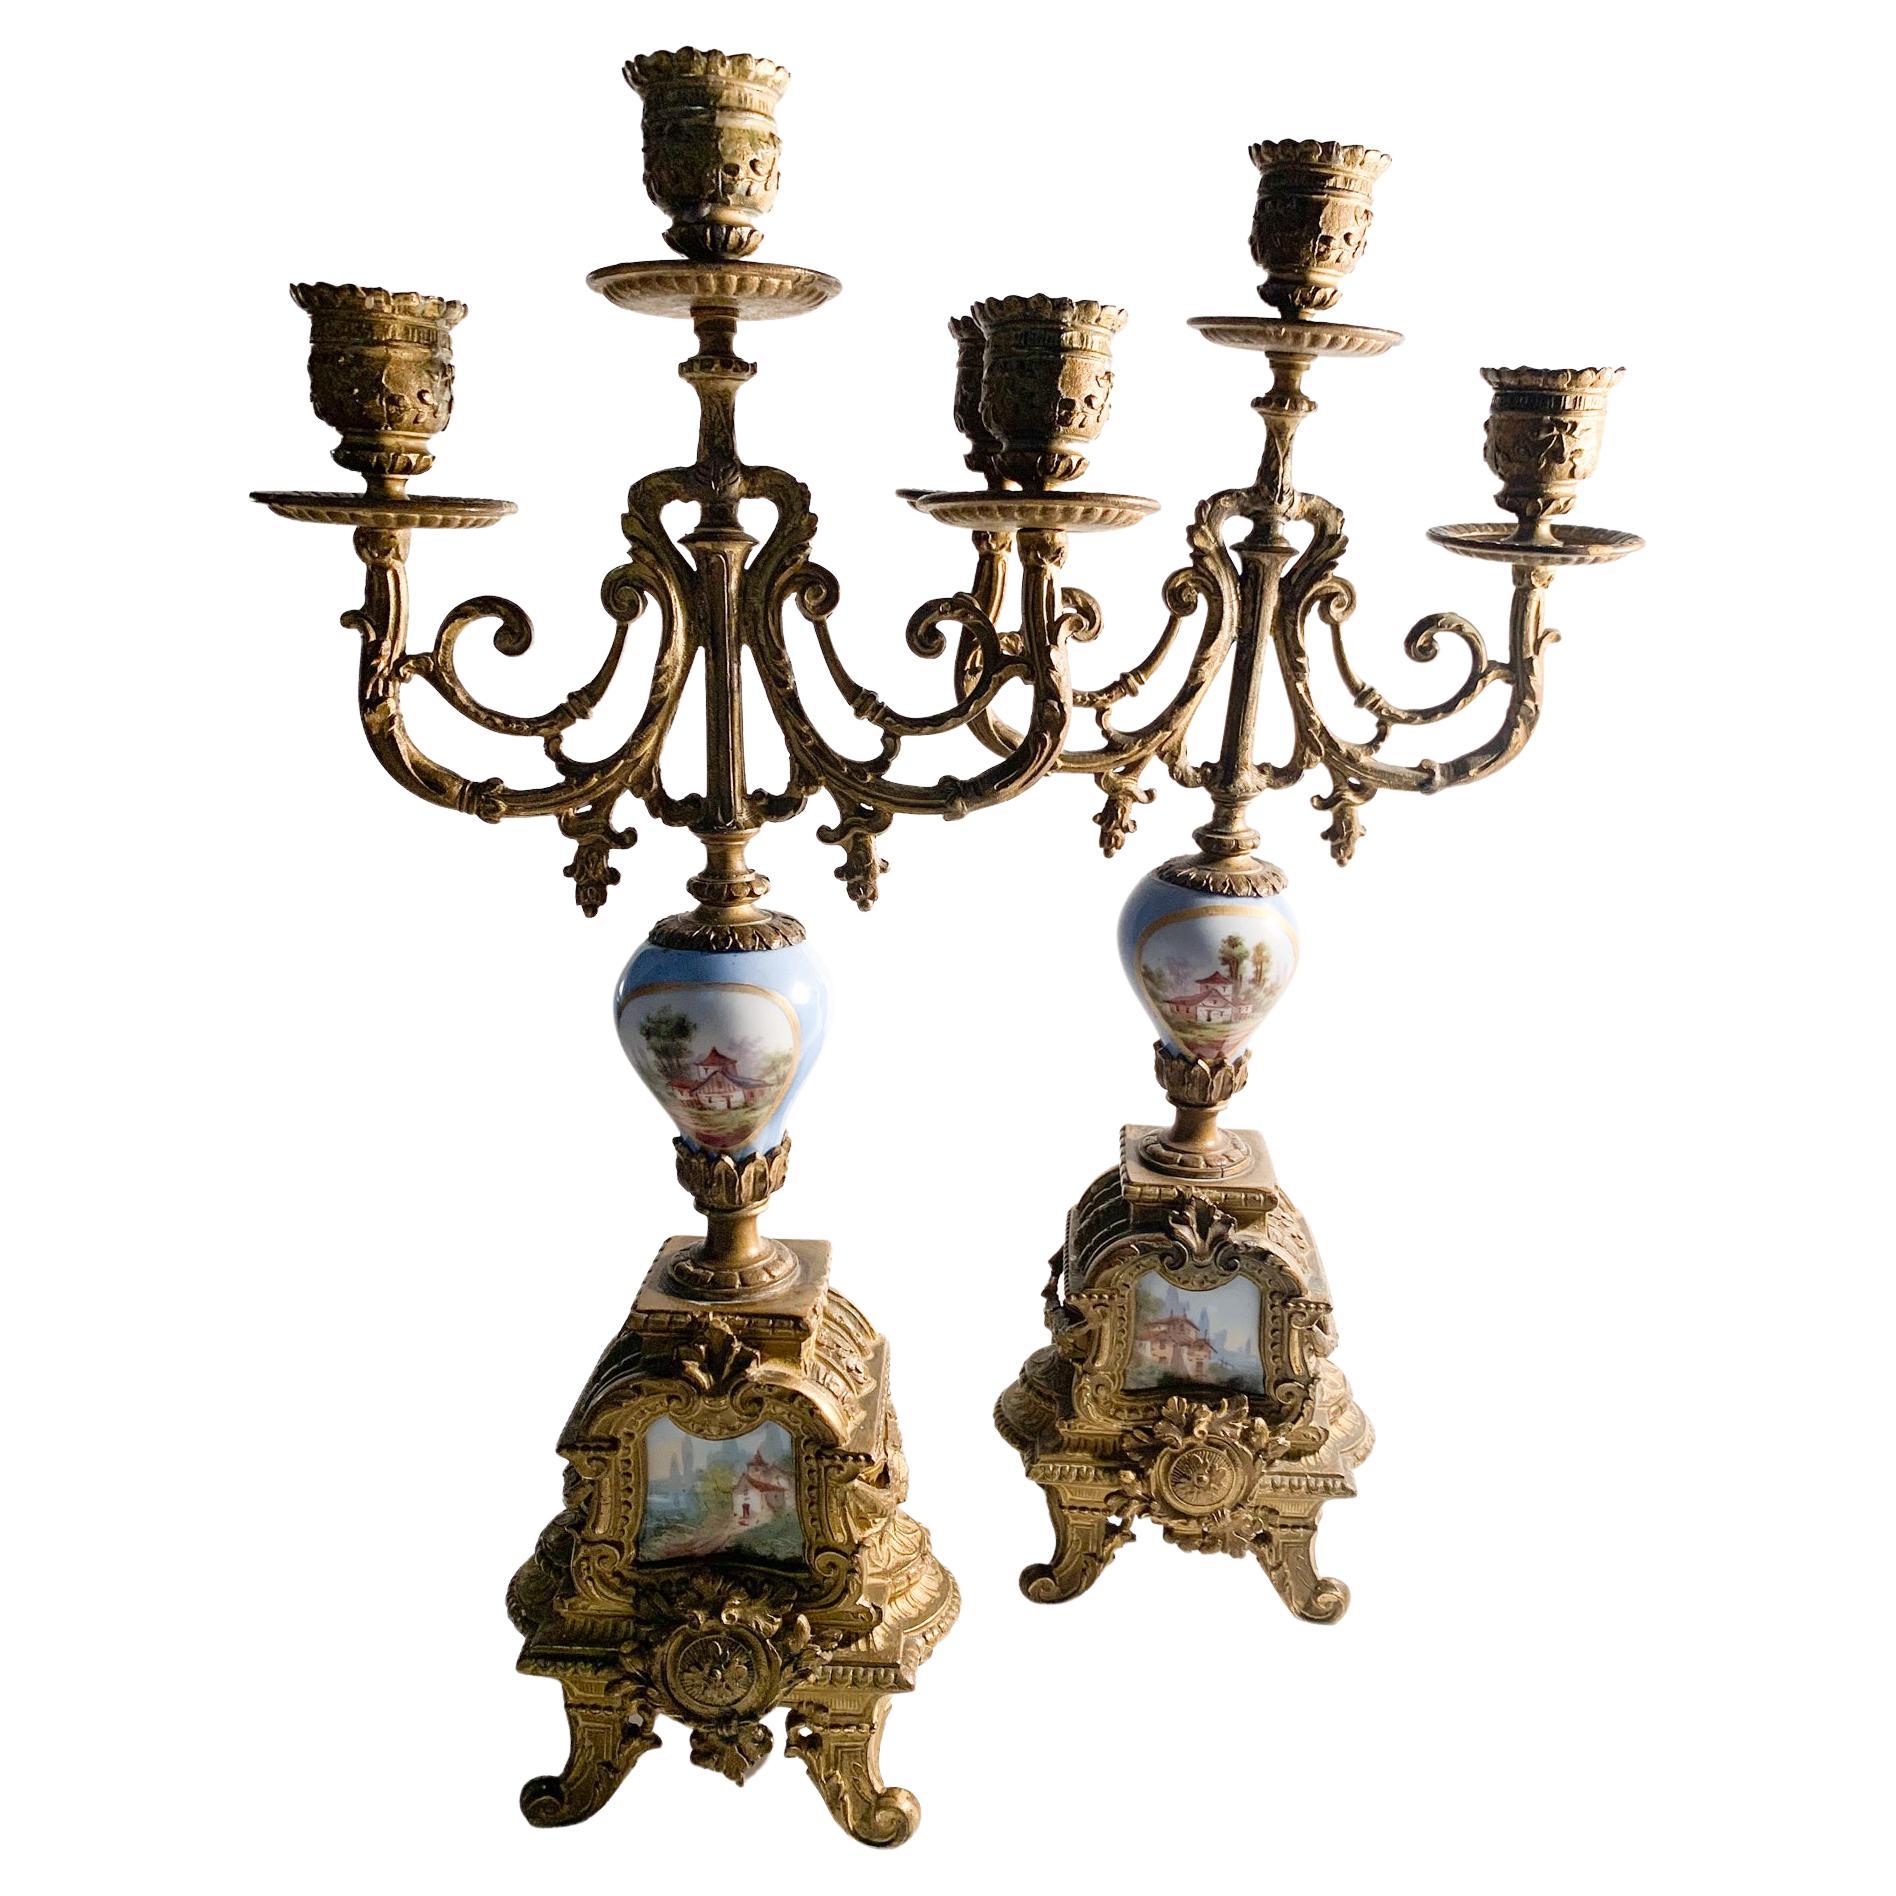 Pair of Limoges Empire Candelabra in Bronze and Porcelain from the 1800s